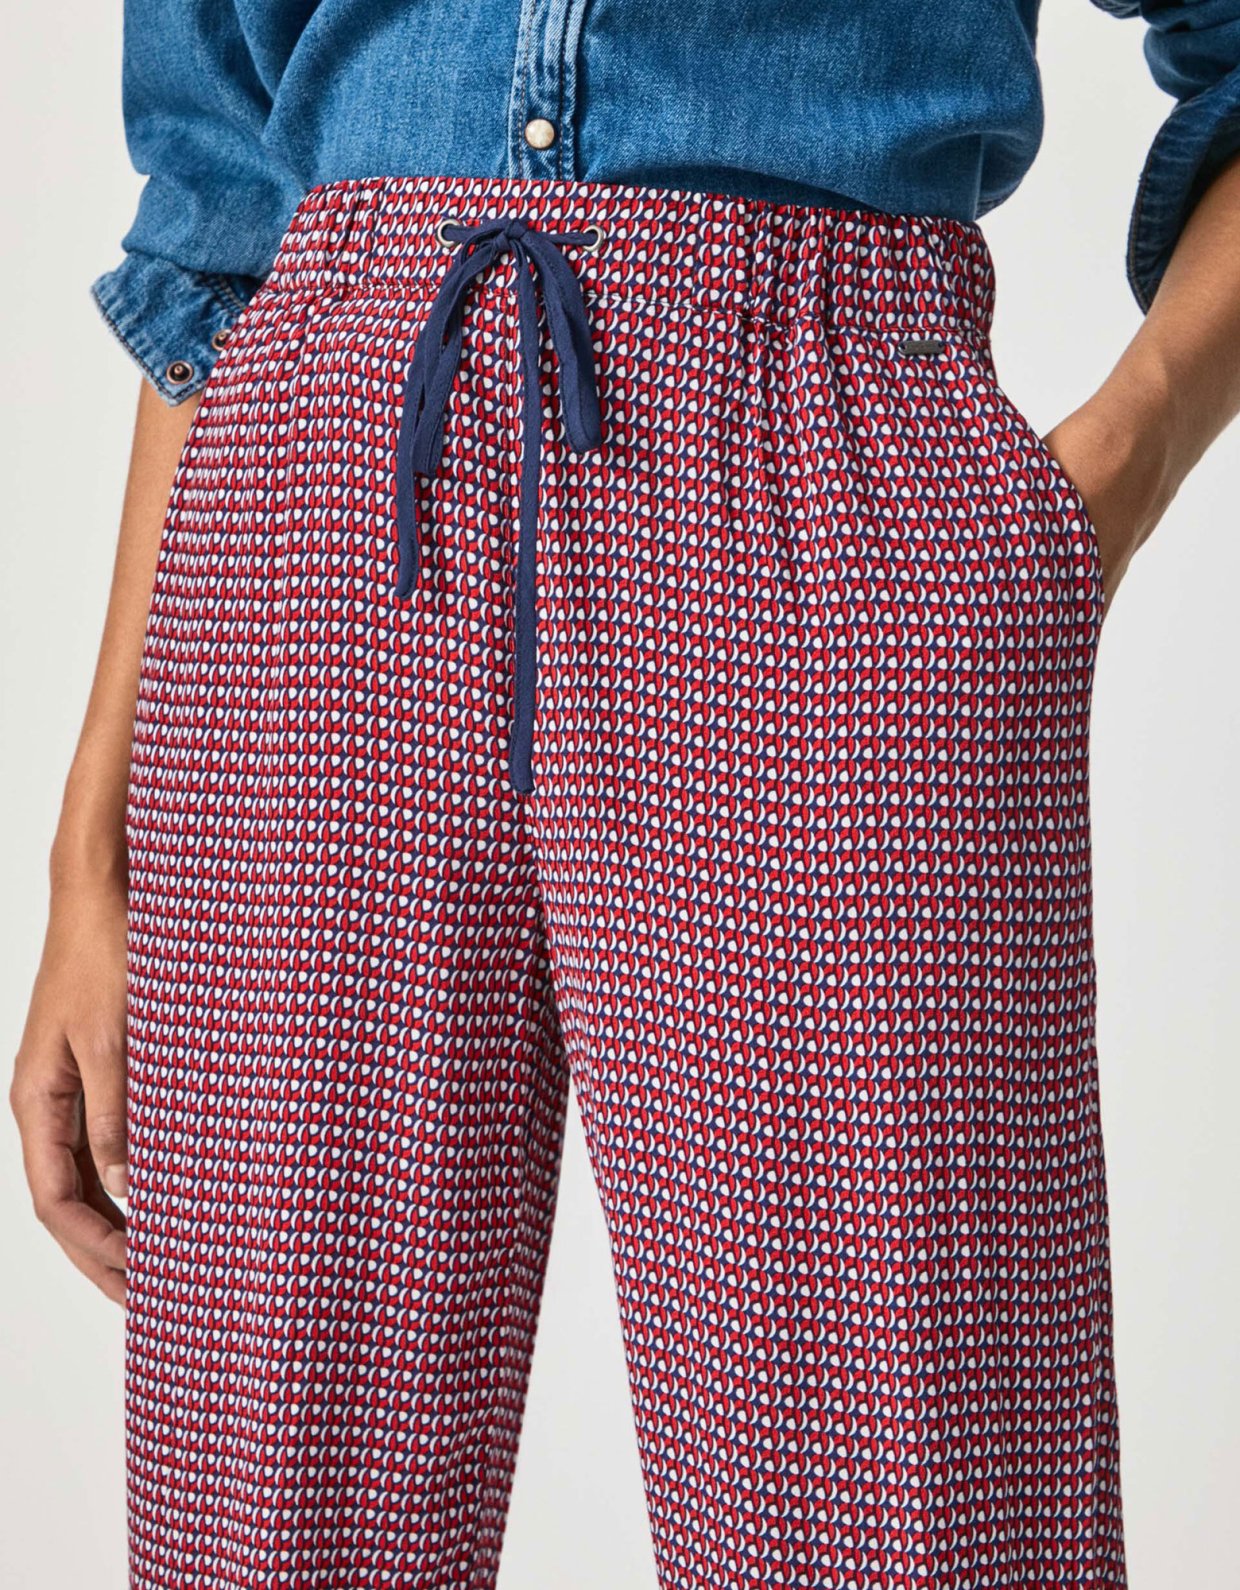 Pepe Jeans Lexy printed trousers